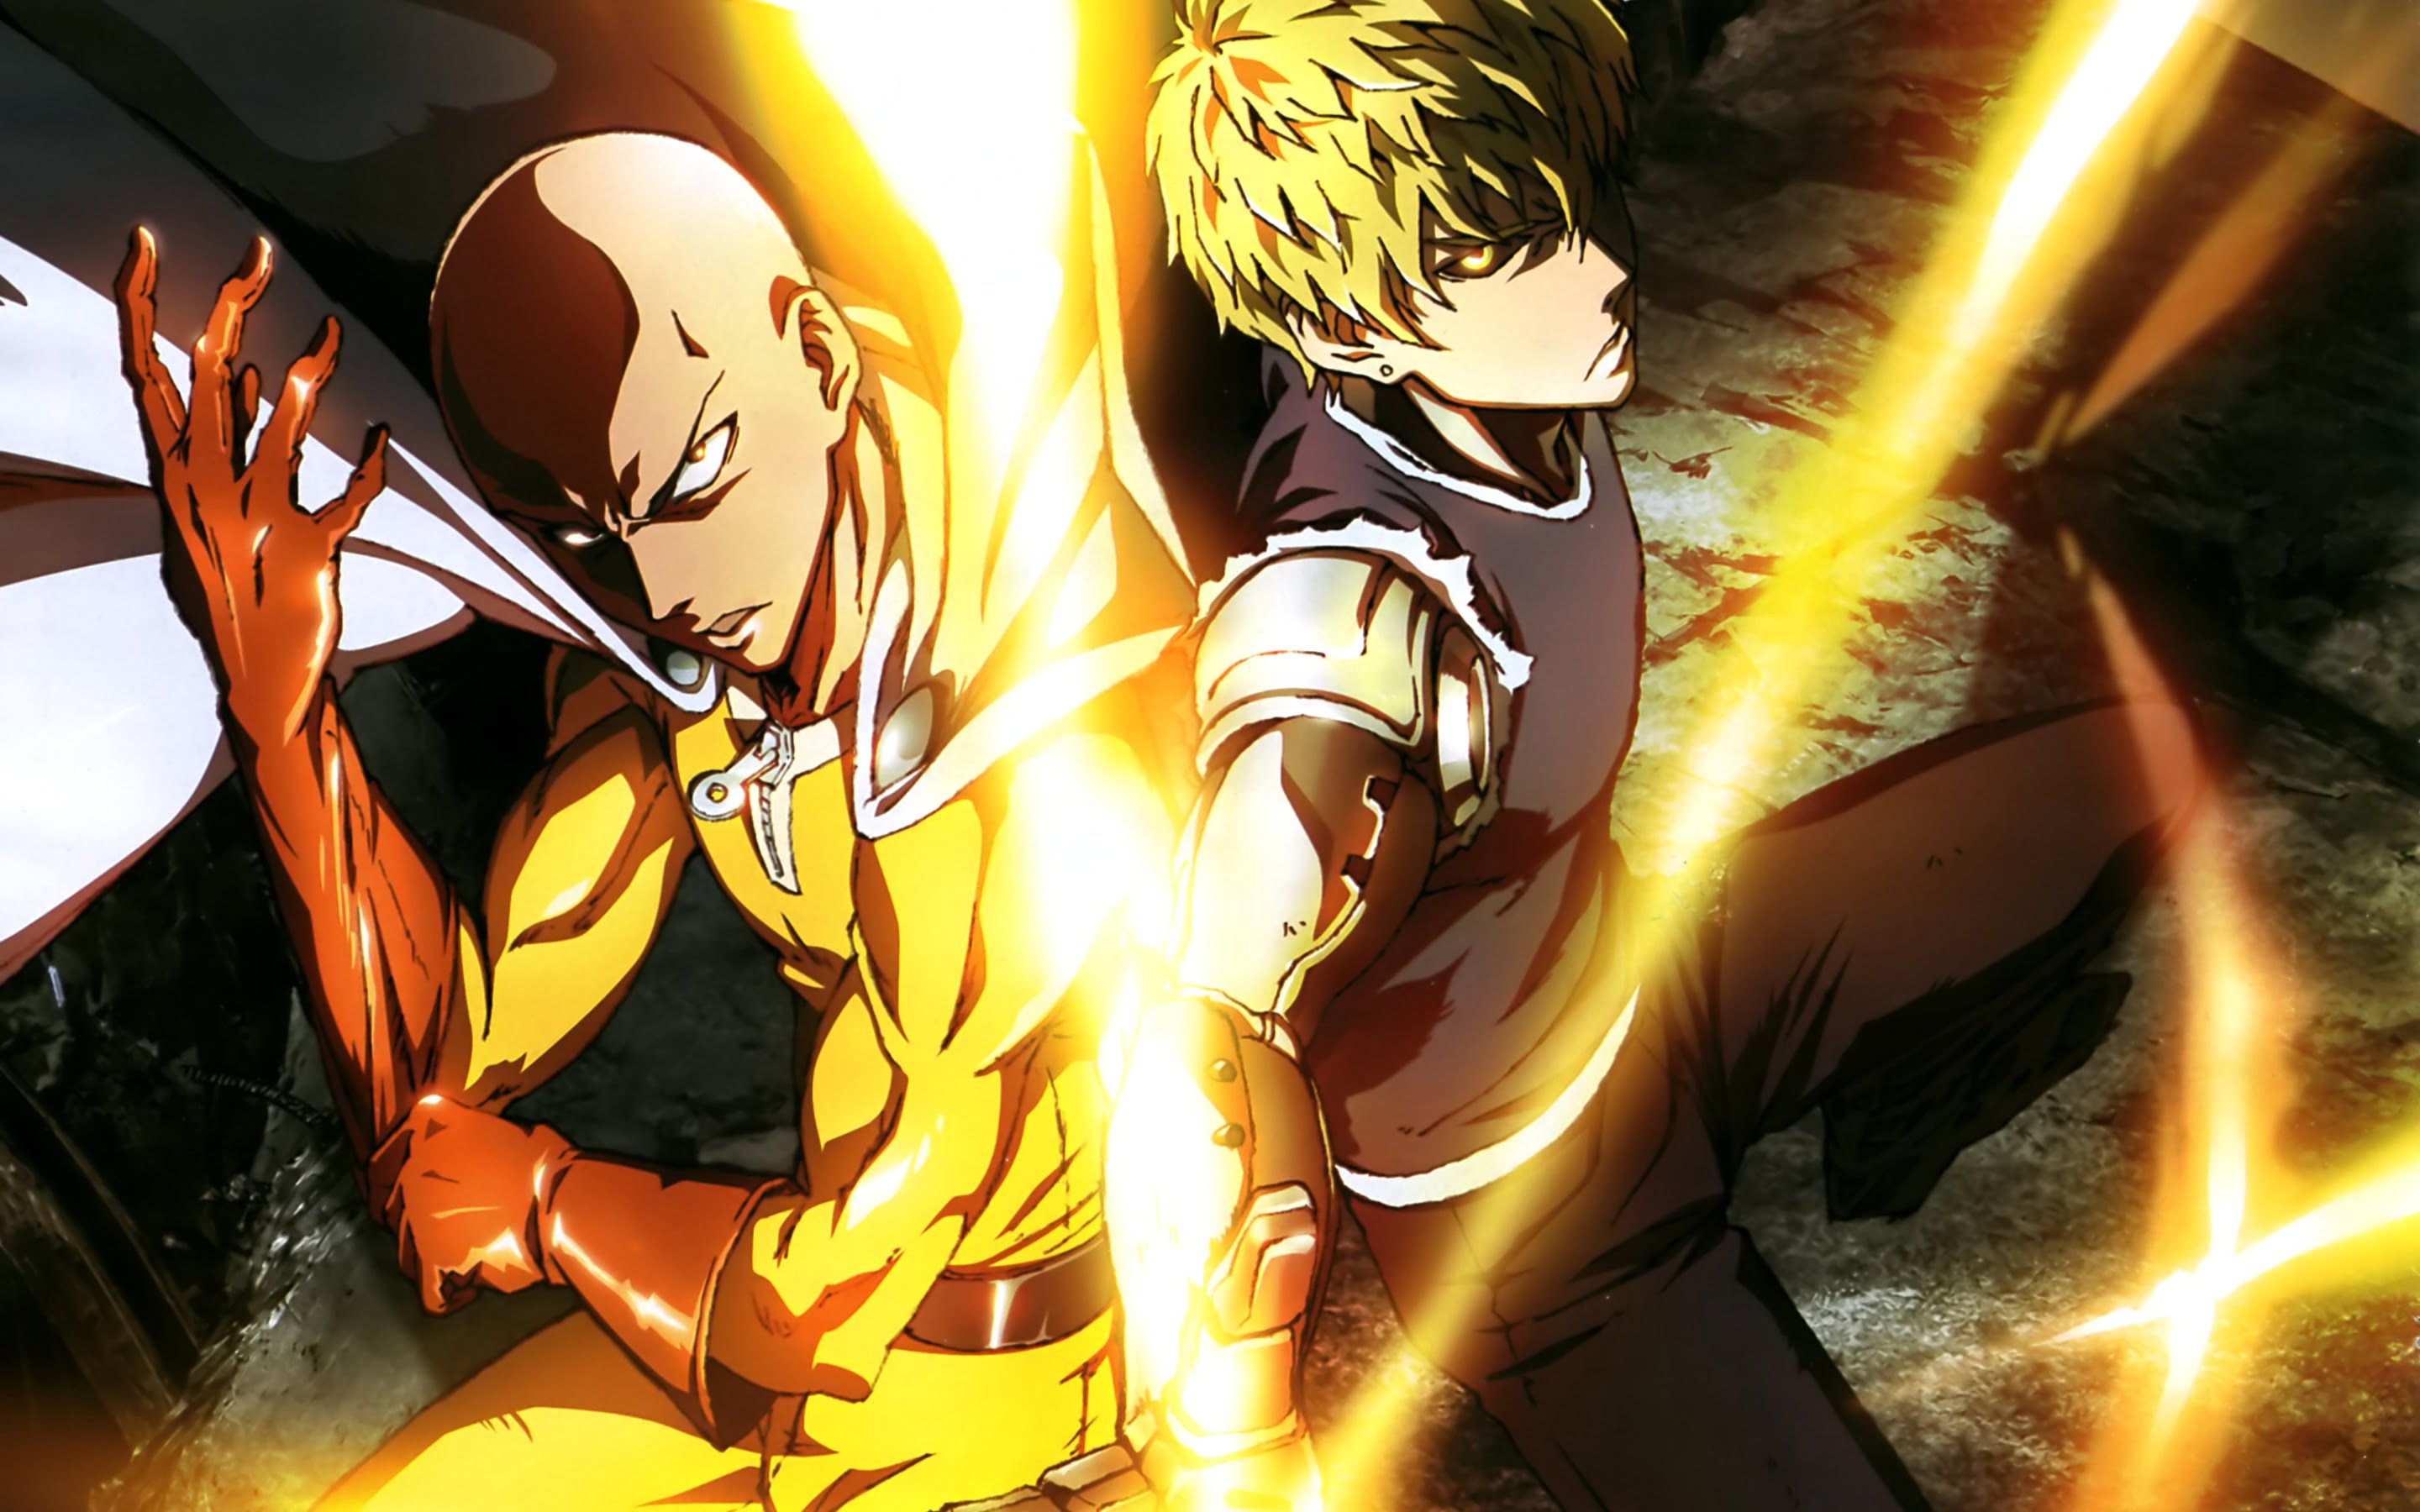 One Punch Man Wallpaper Discover more Anime, One Punch Man, Saitama  wallpaper.